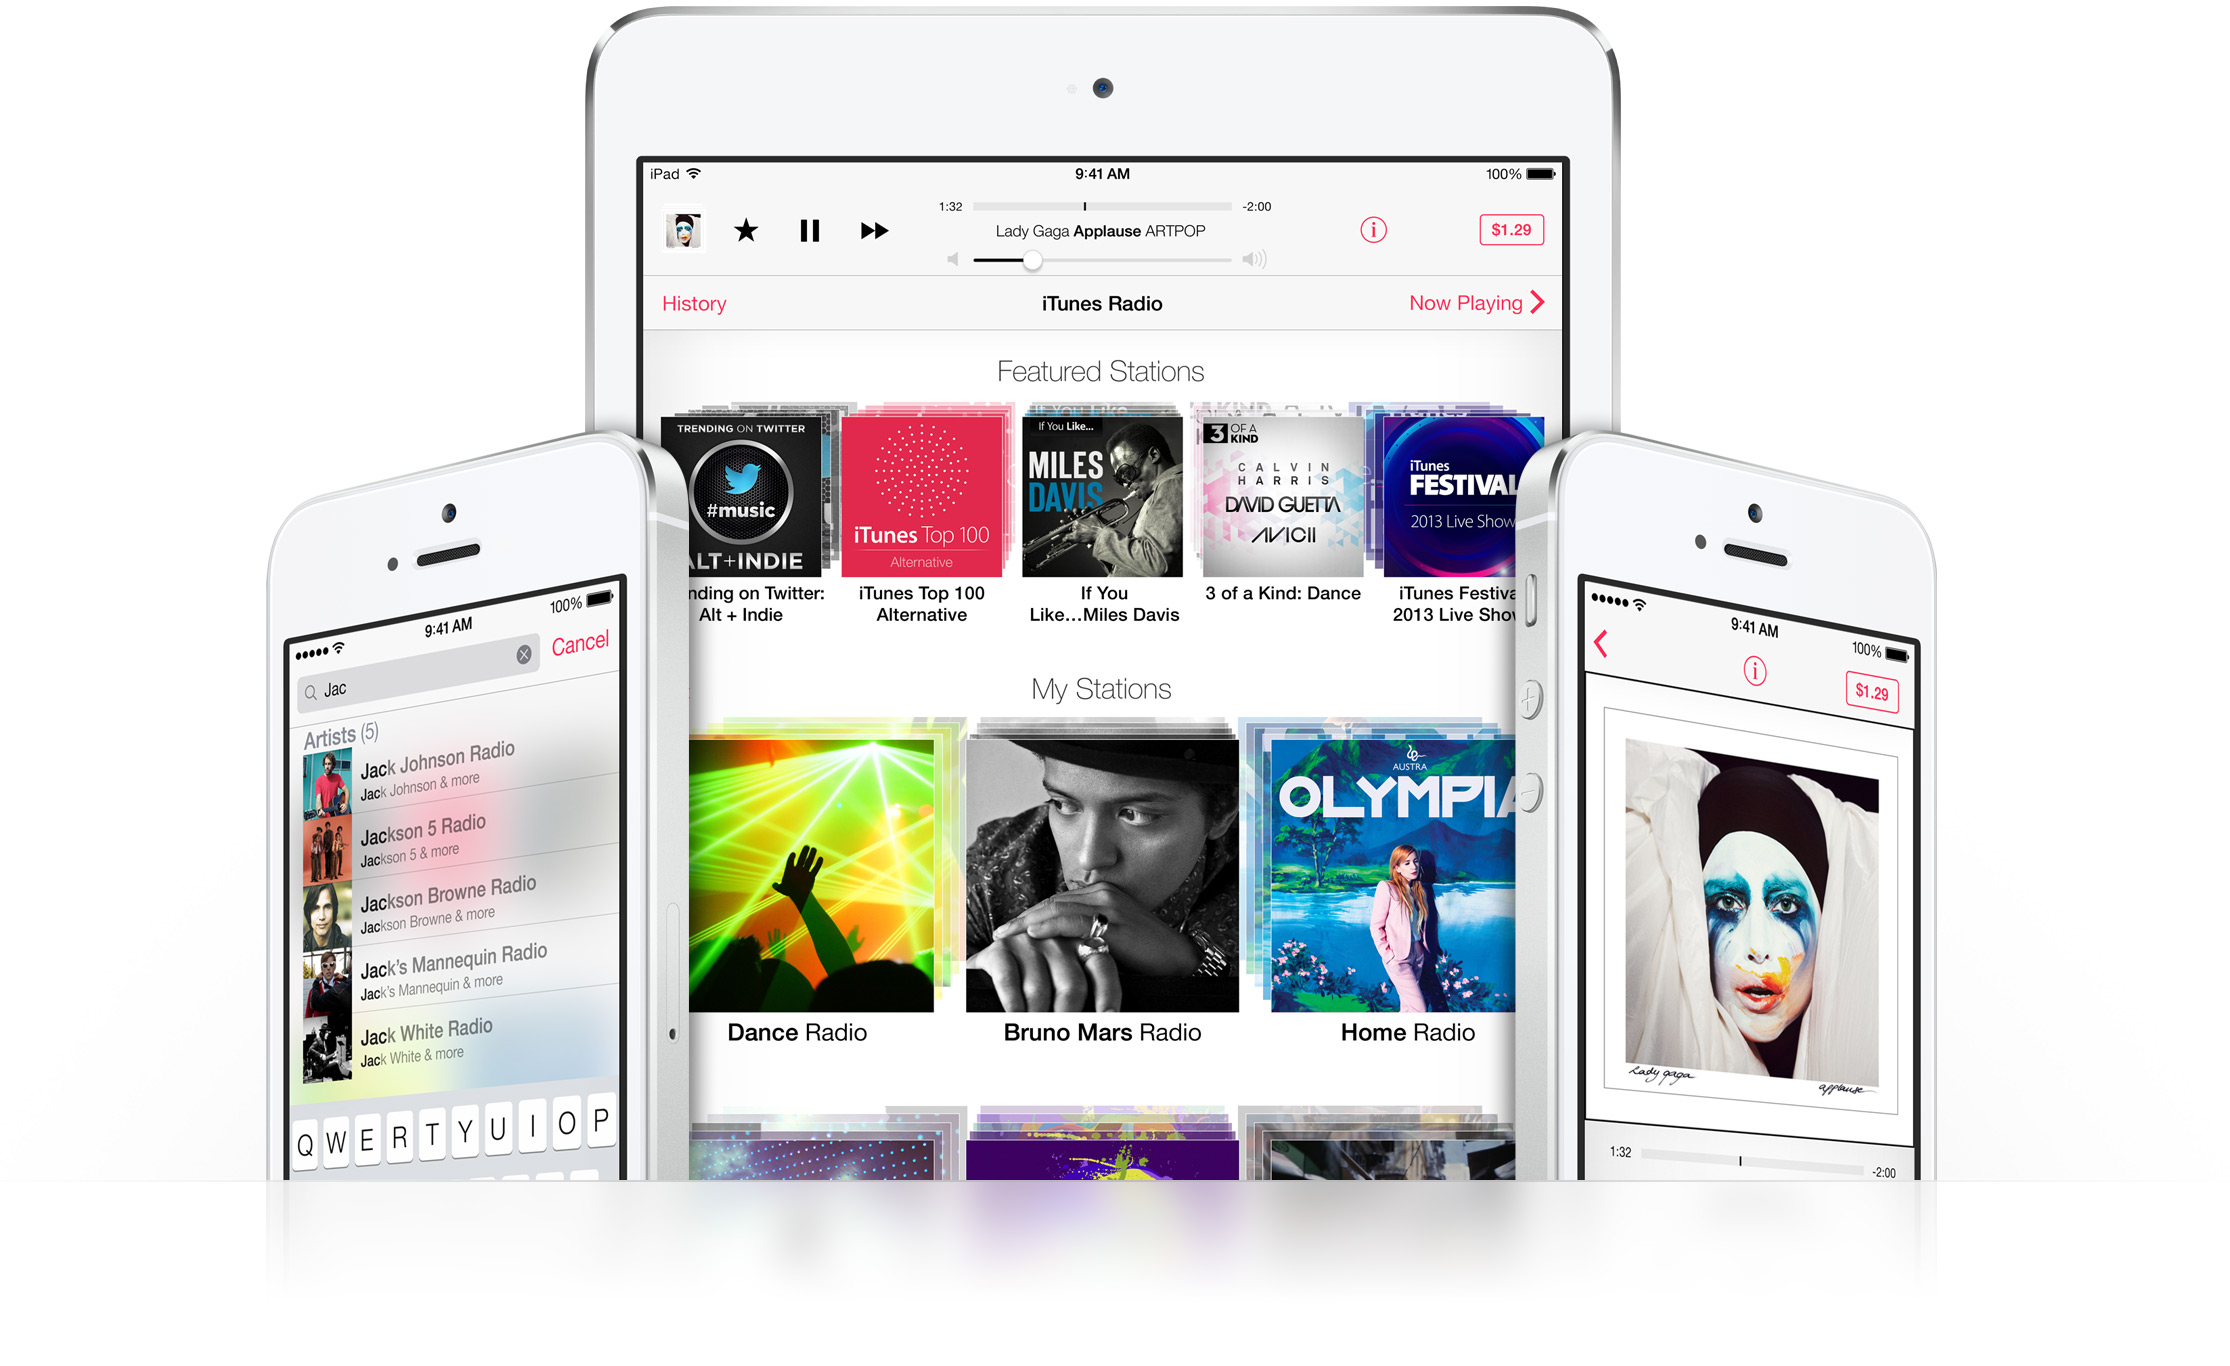 Hey Australians, You Can Now Use The iTunes Radio Streaming Service!